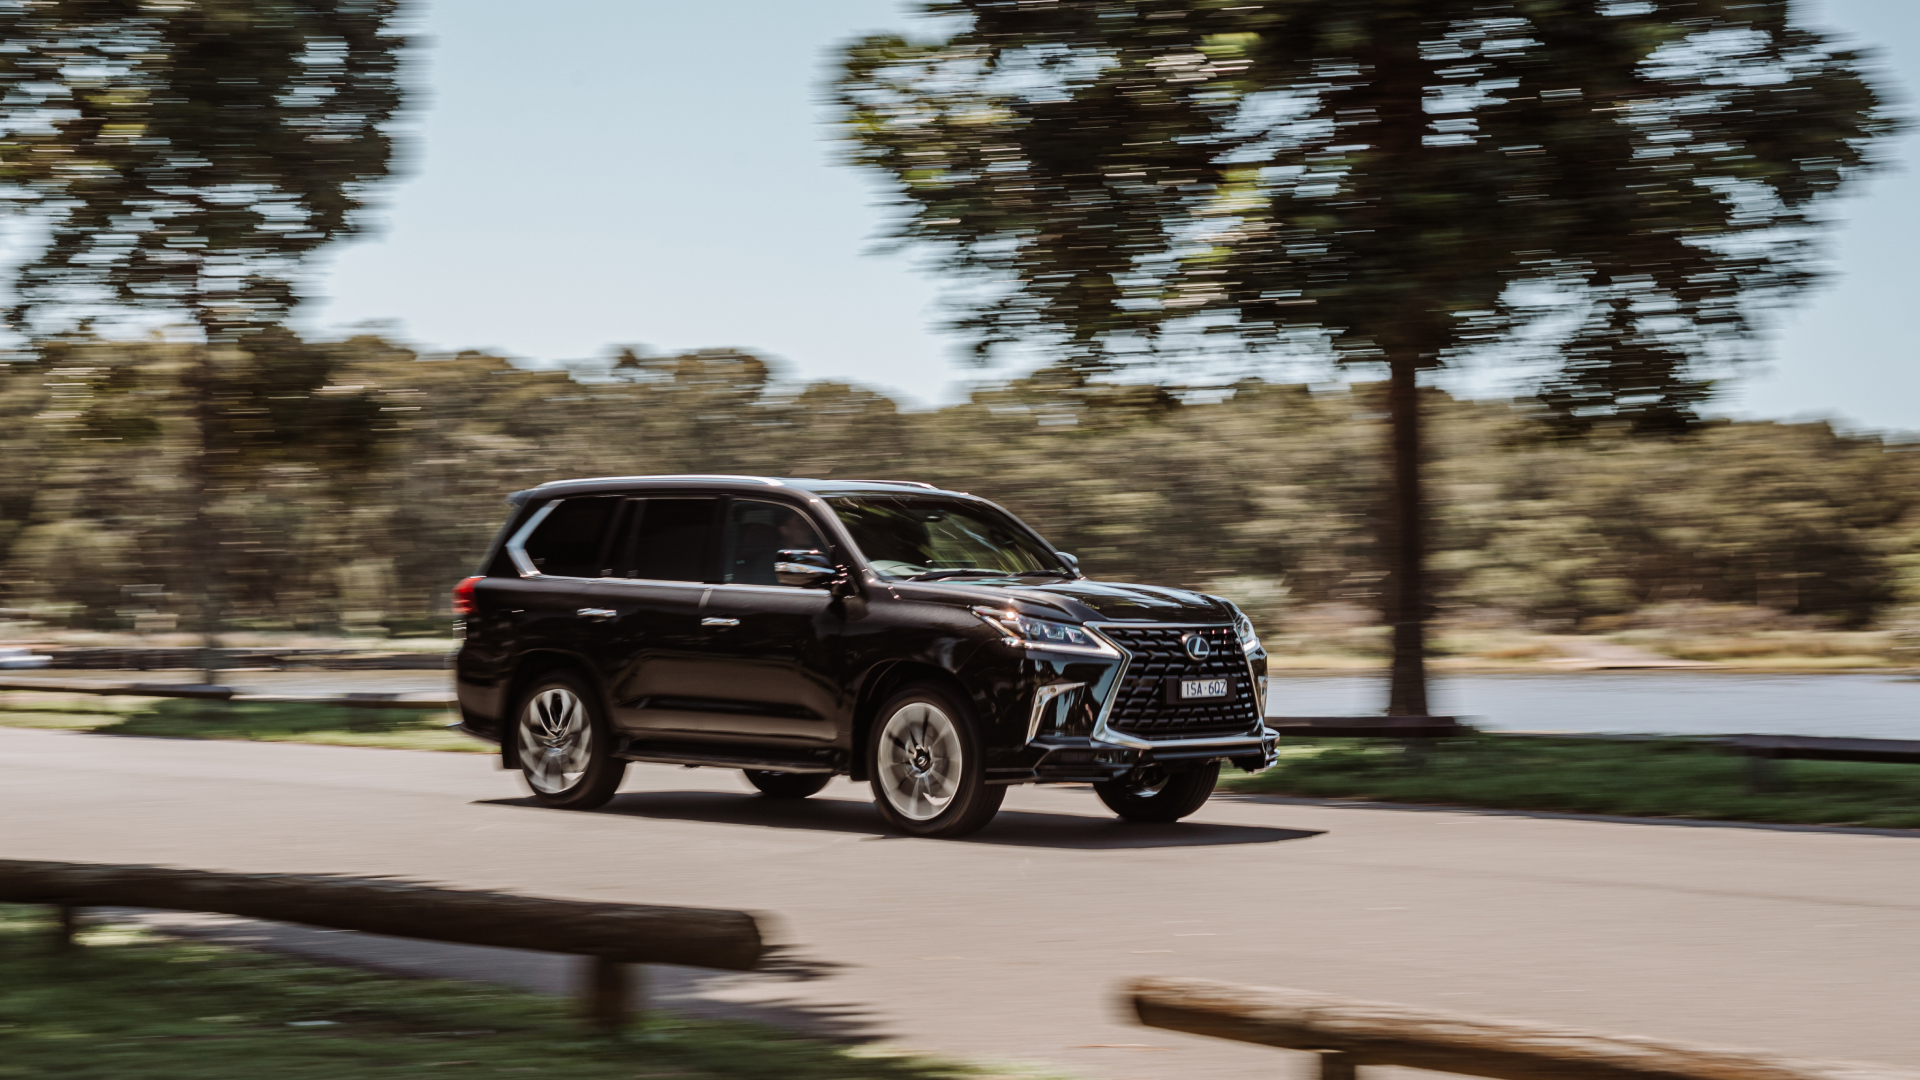 A 2021 Lexus LX 570 S drives along a road at speed.